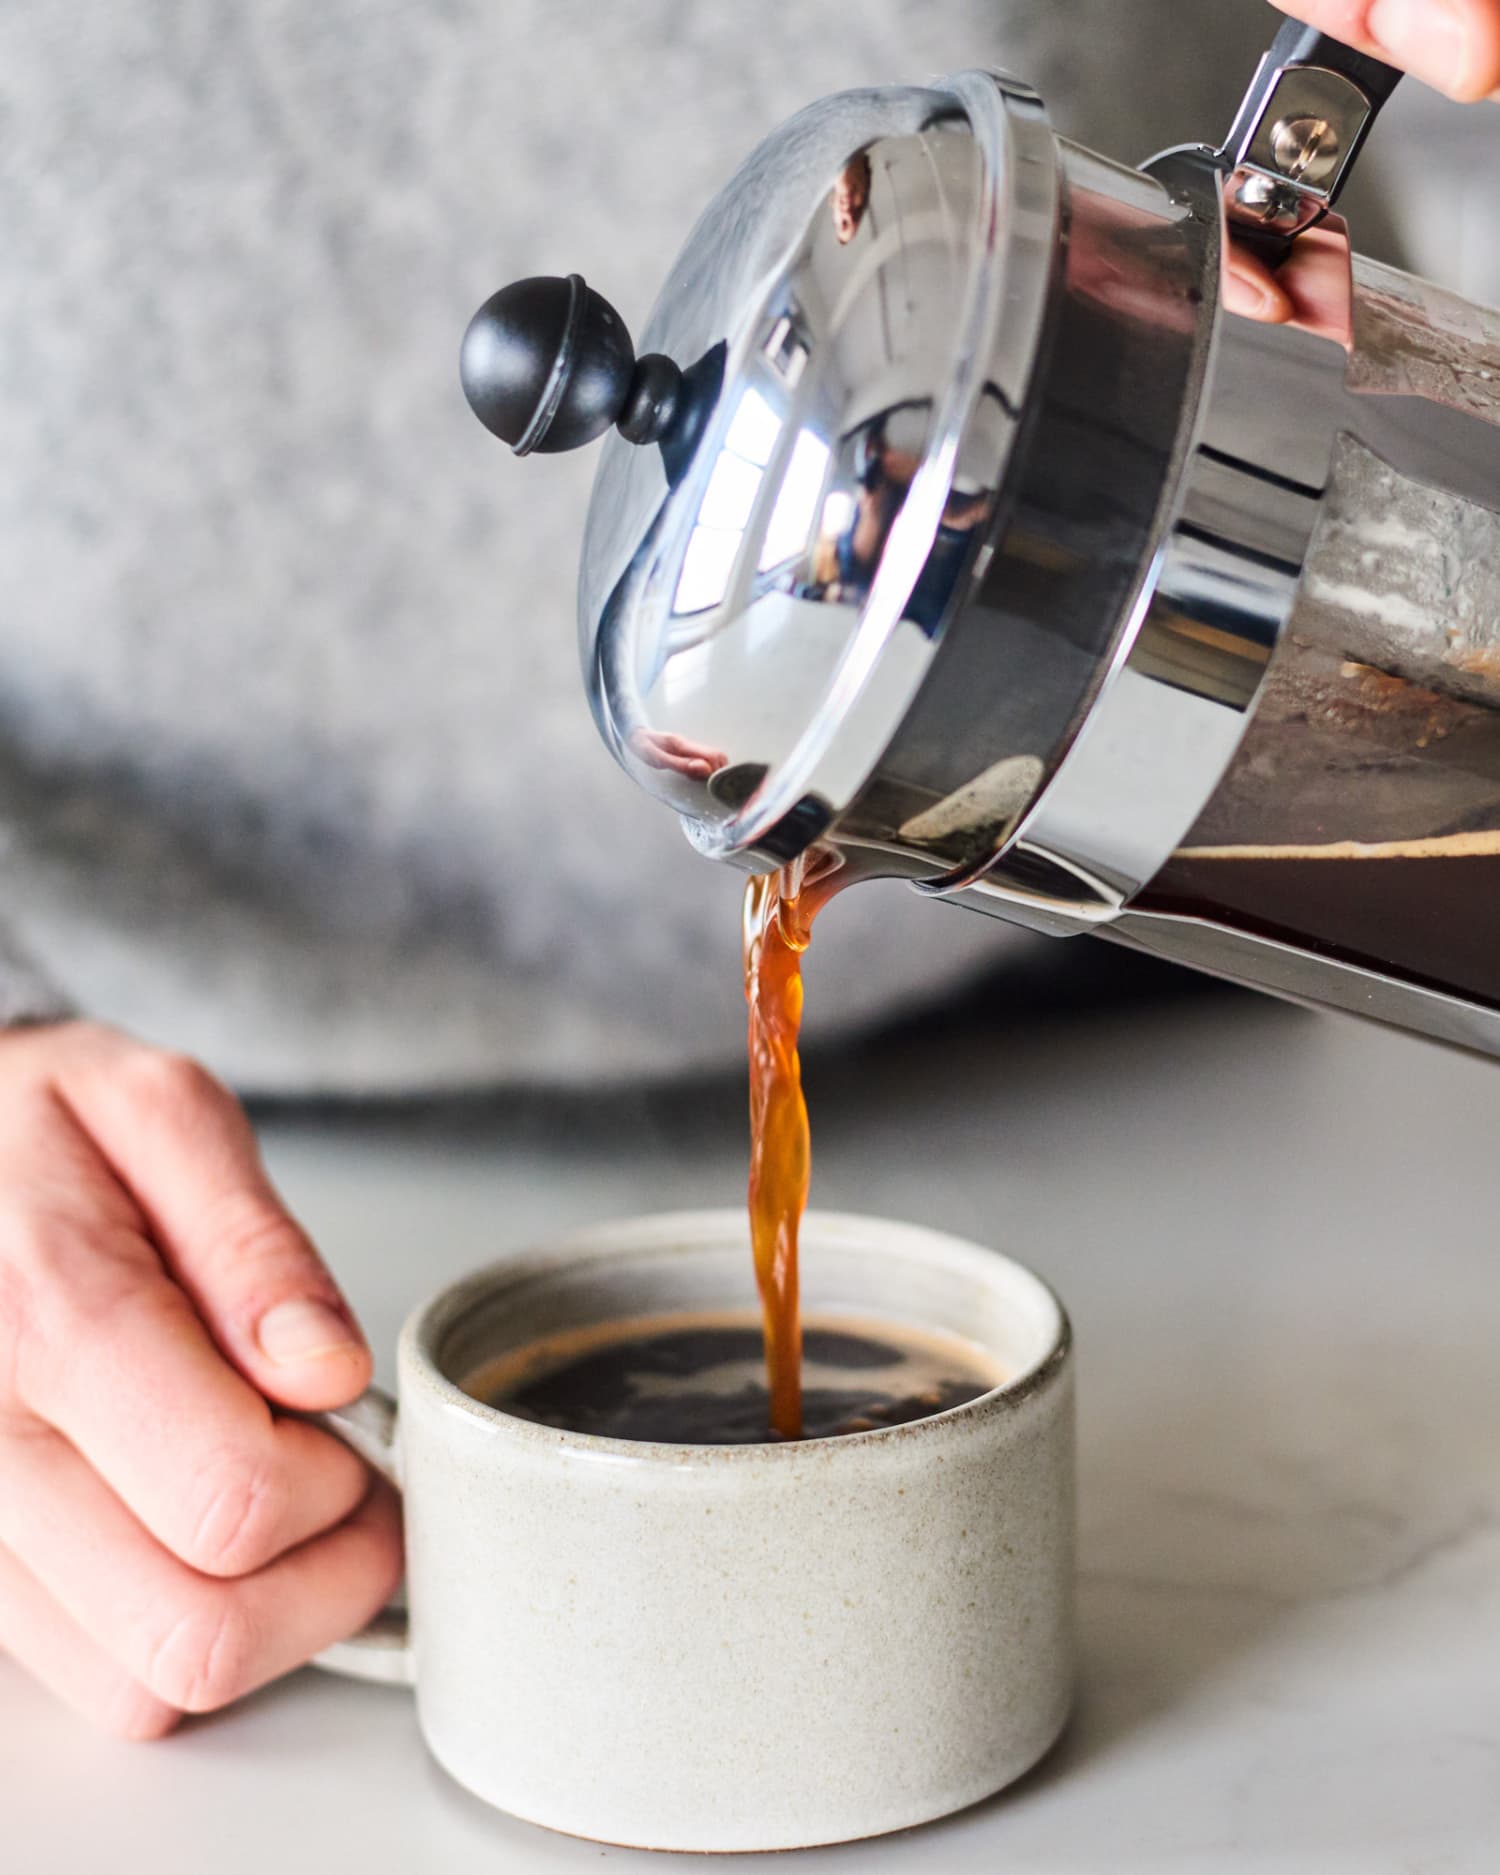 If You Love French Press Coffee, You Need This Ingenious $15 Amazon Find